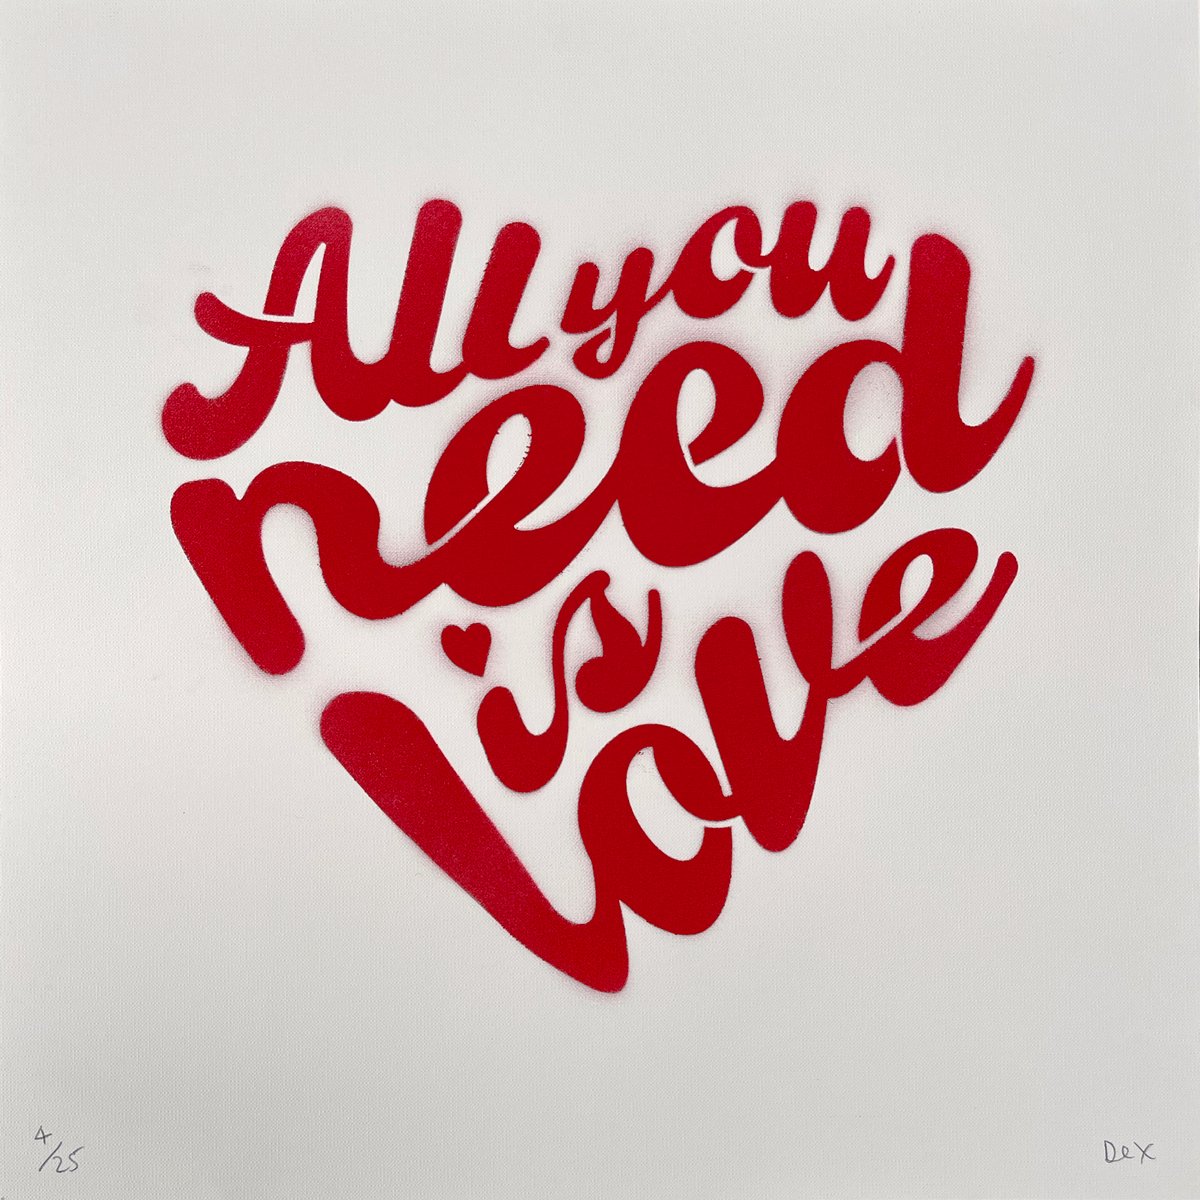 all you need is love, love is all you need | Postcard